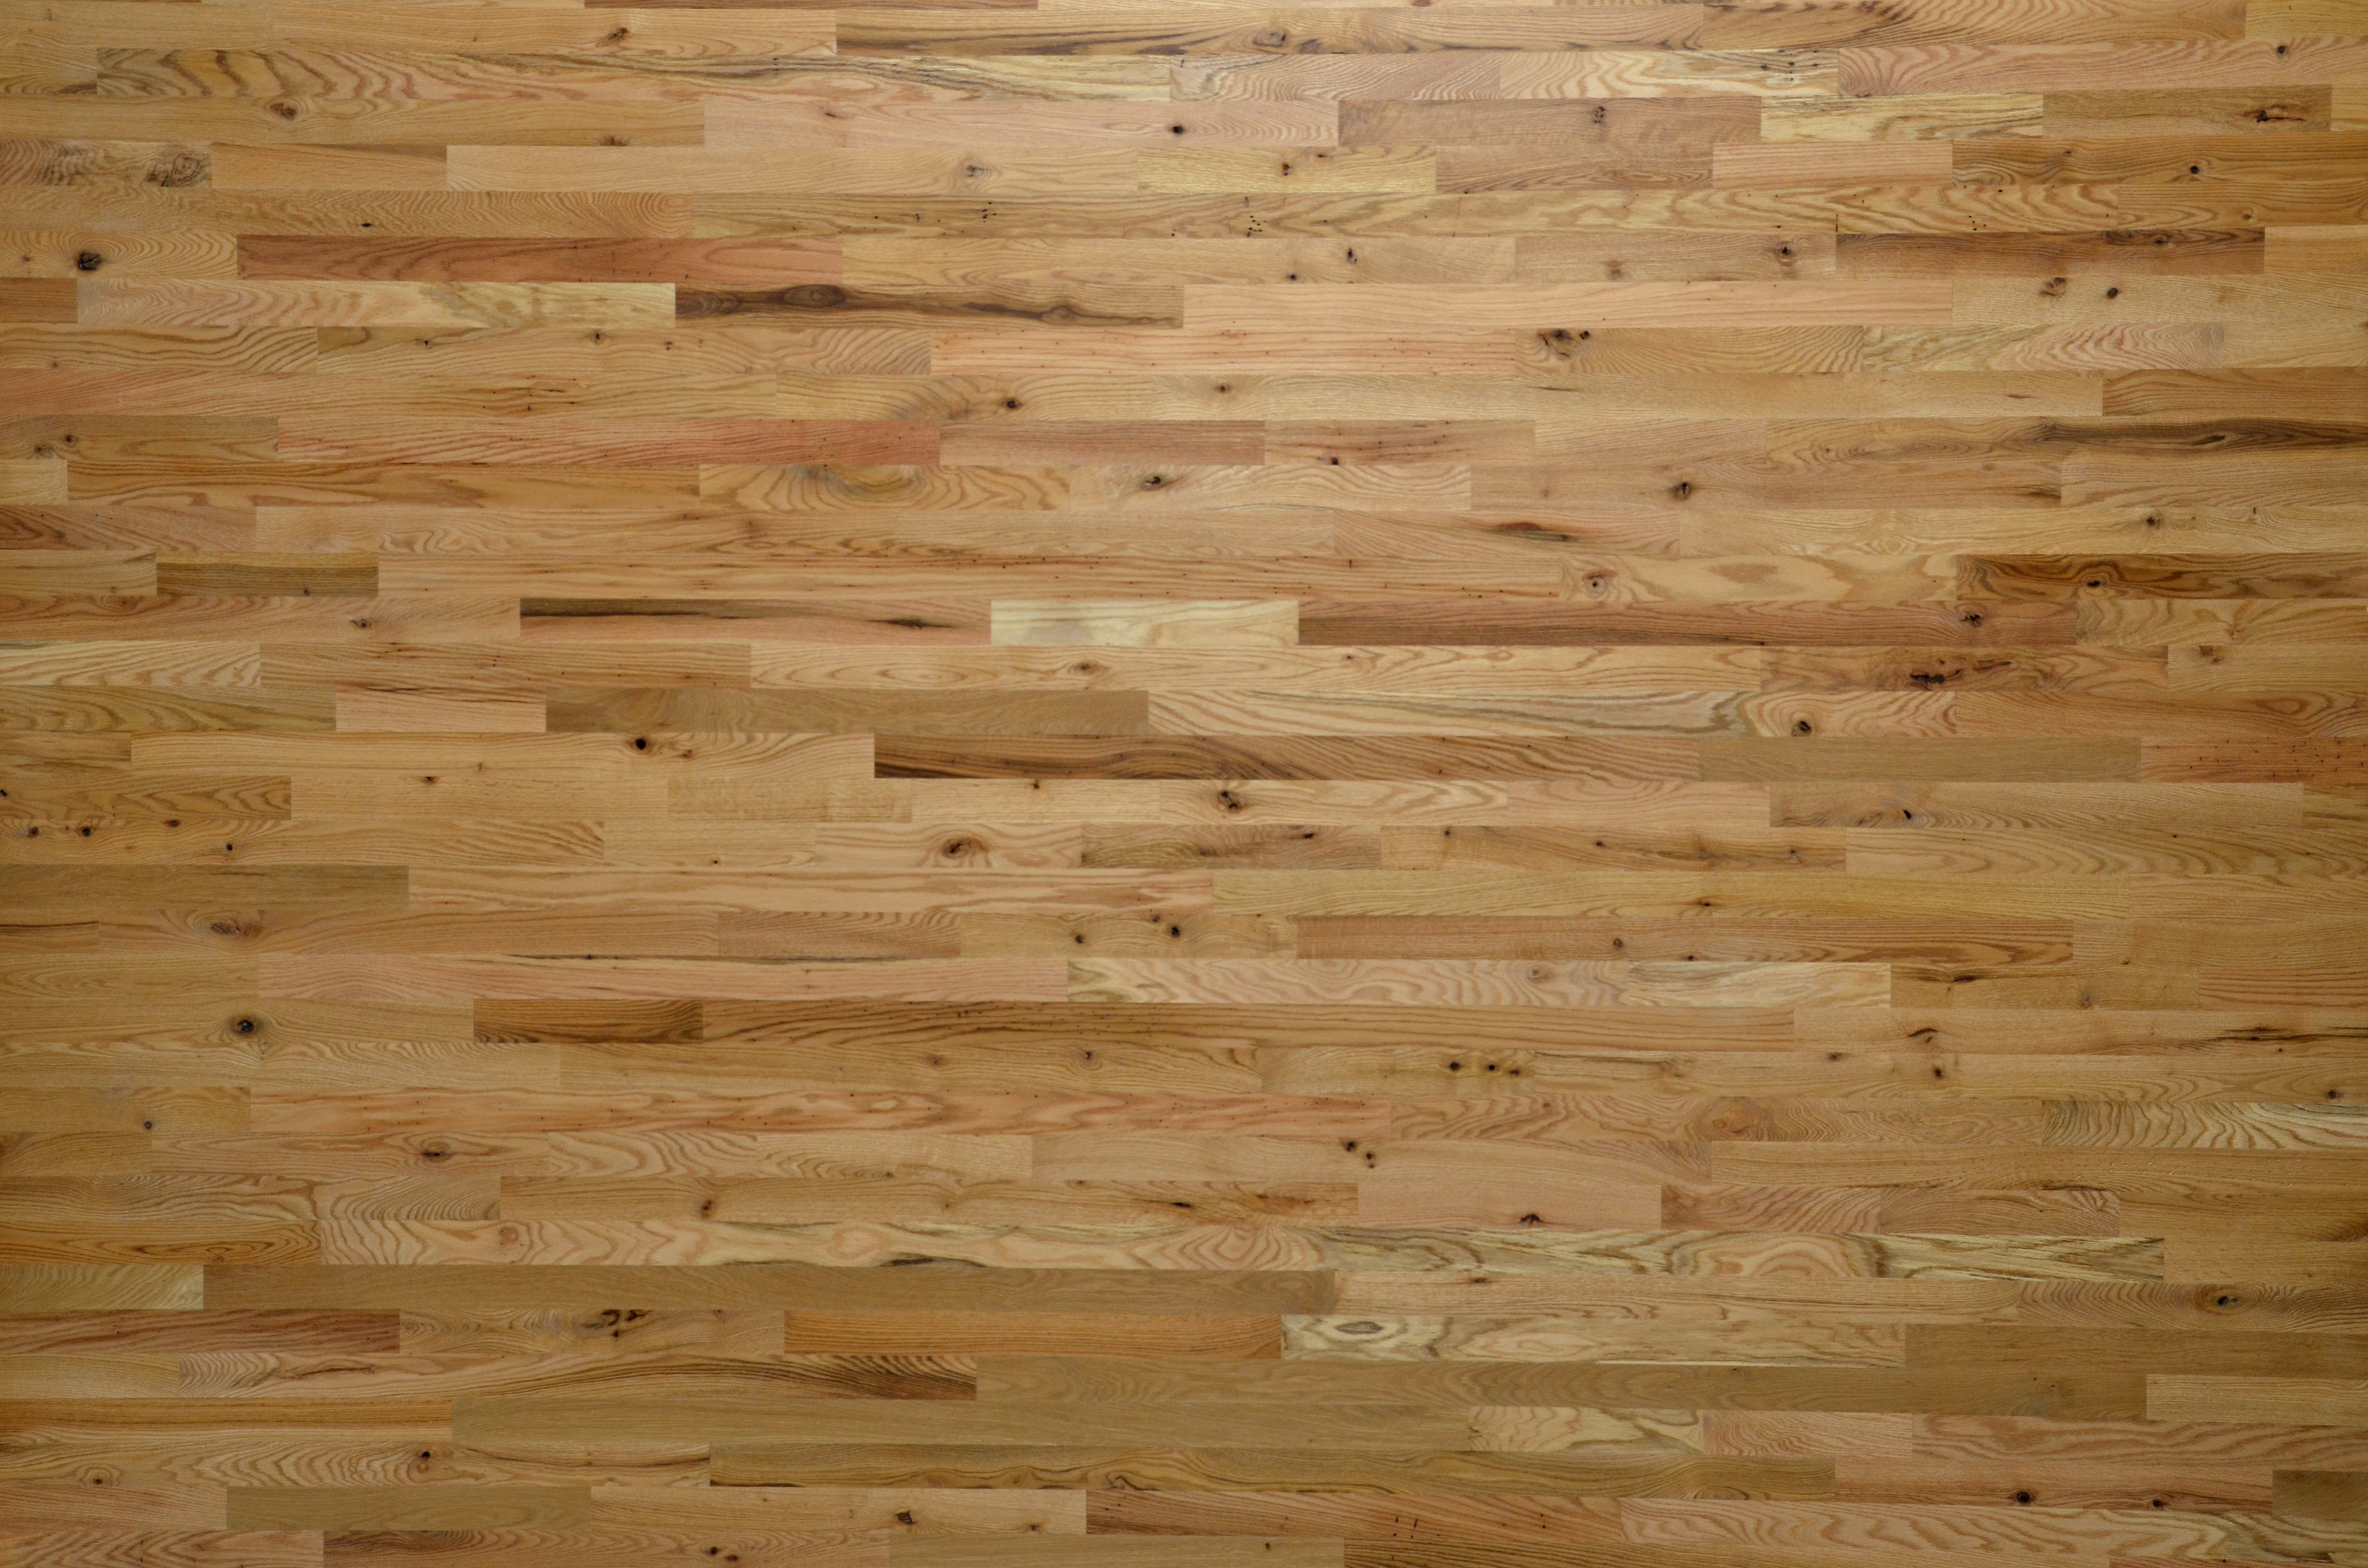 Red Oak Hardwood Flooring for Sale Of Lacrosse Hardwood Flooring Walnut White Oak Red Oak Hickory Pertaining to 2 Common Red Oak